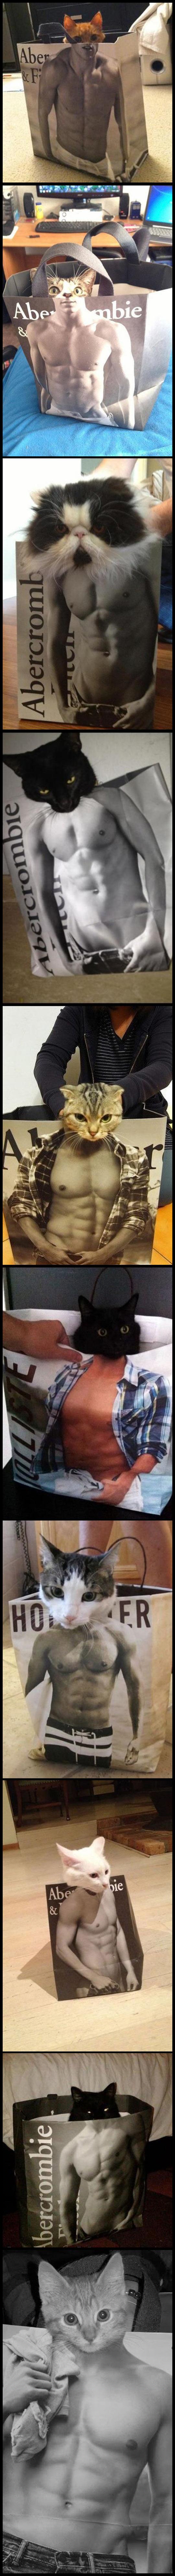 Kittens with abs